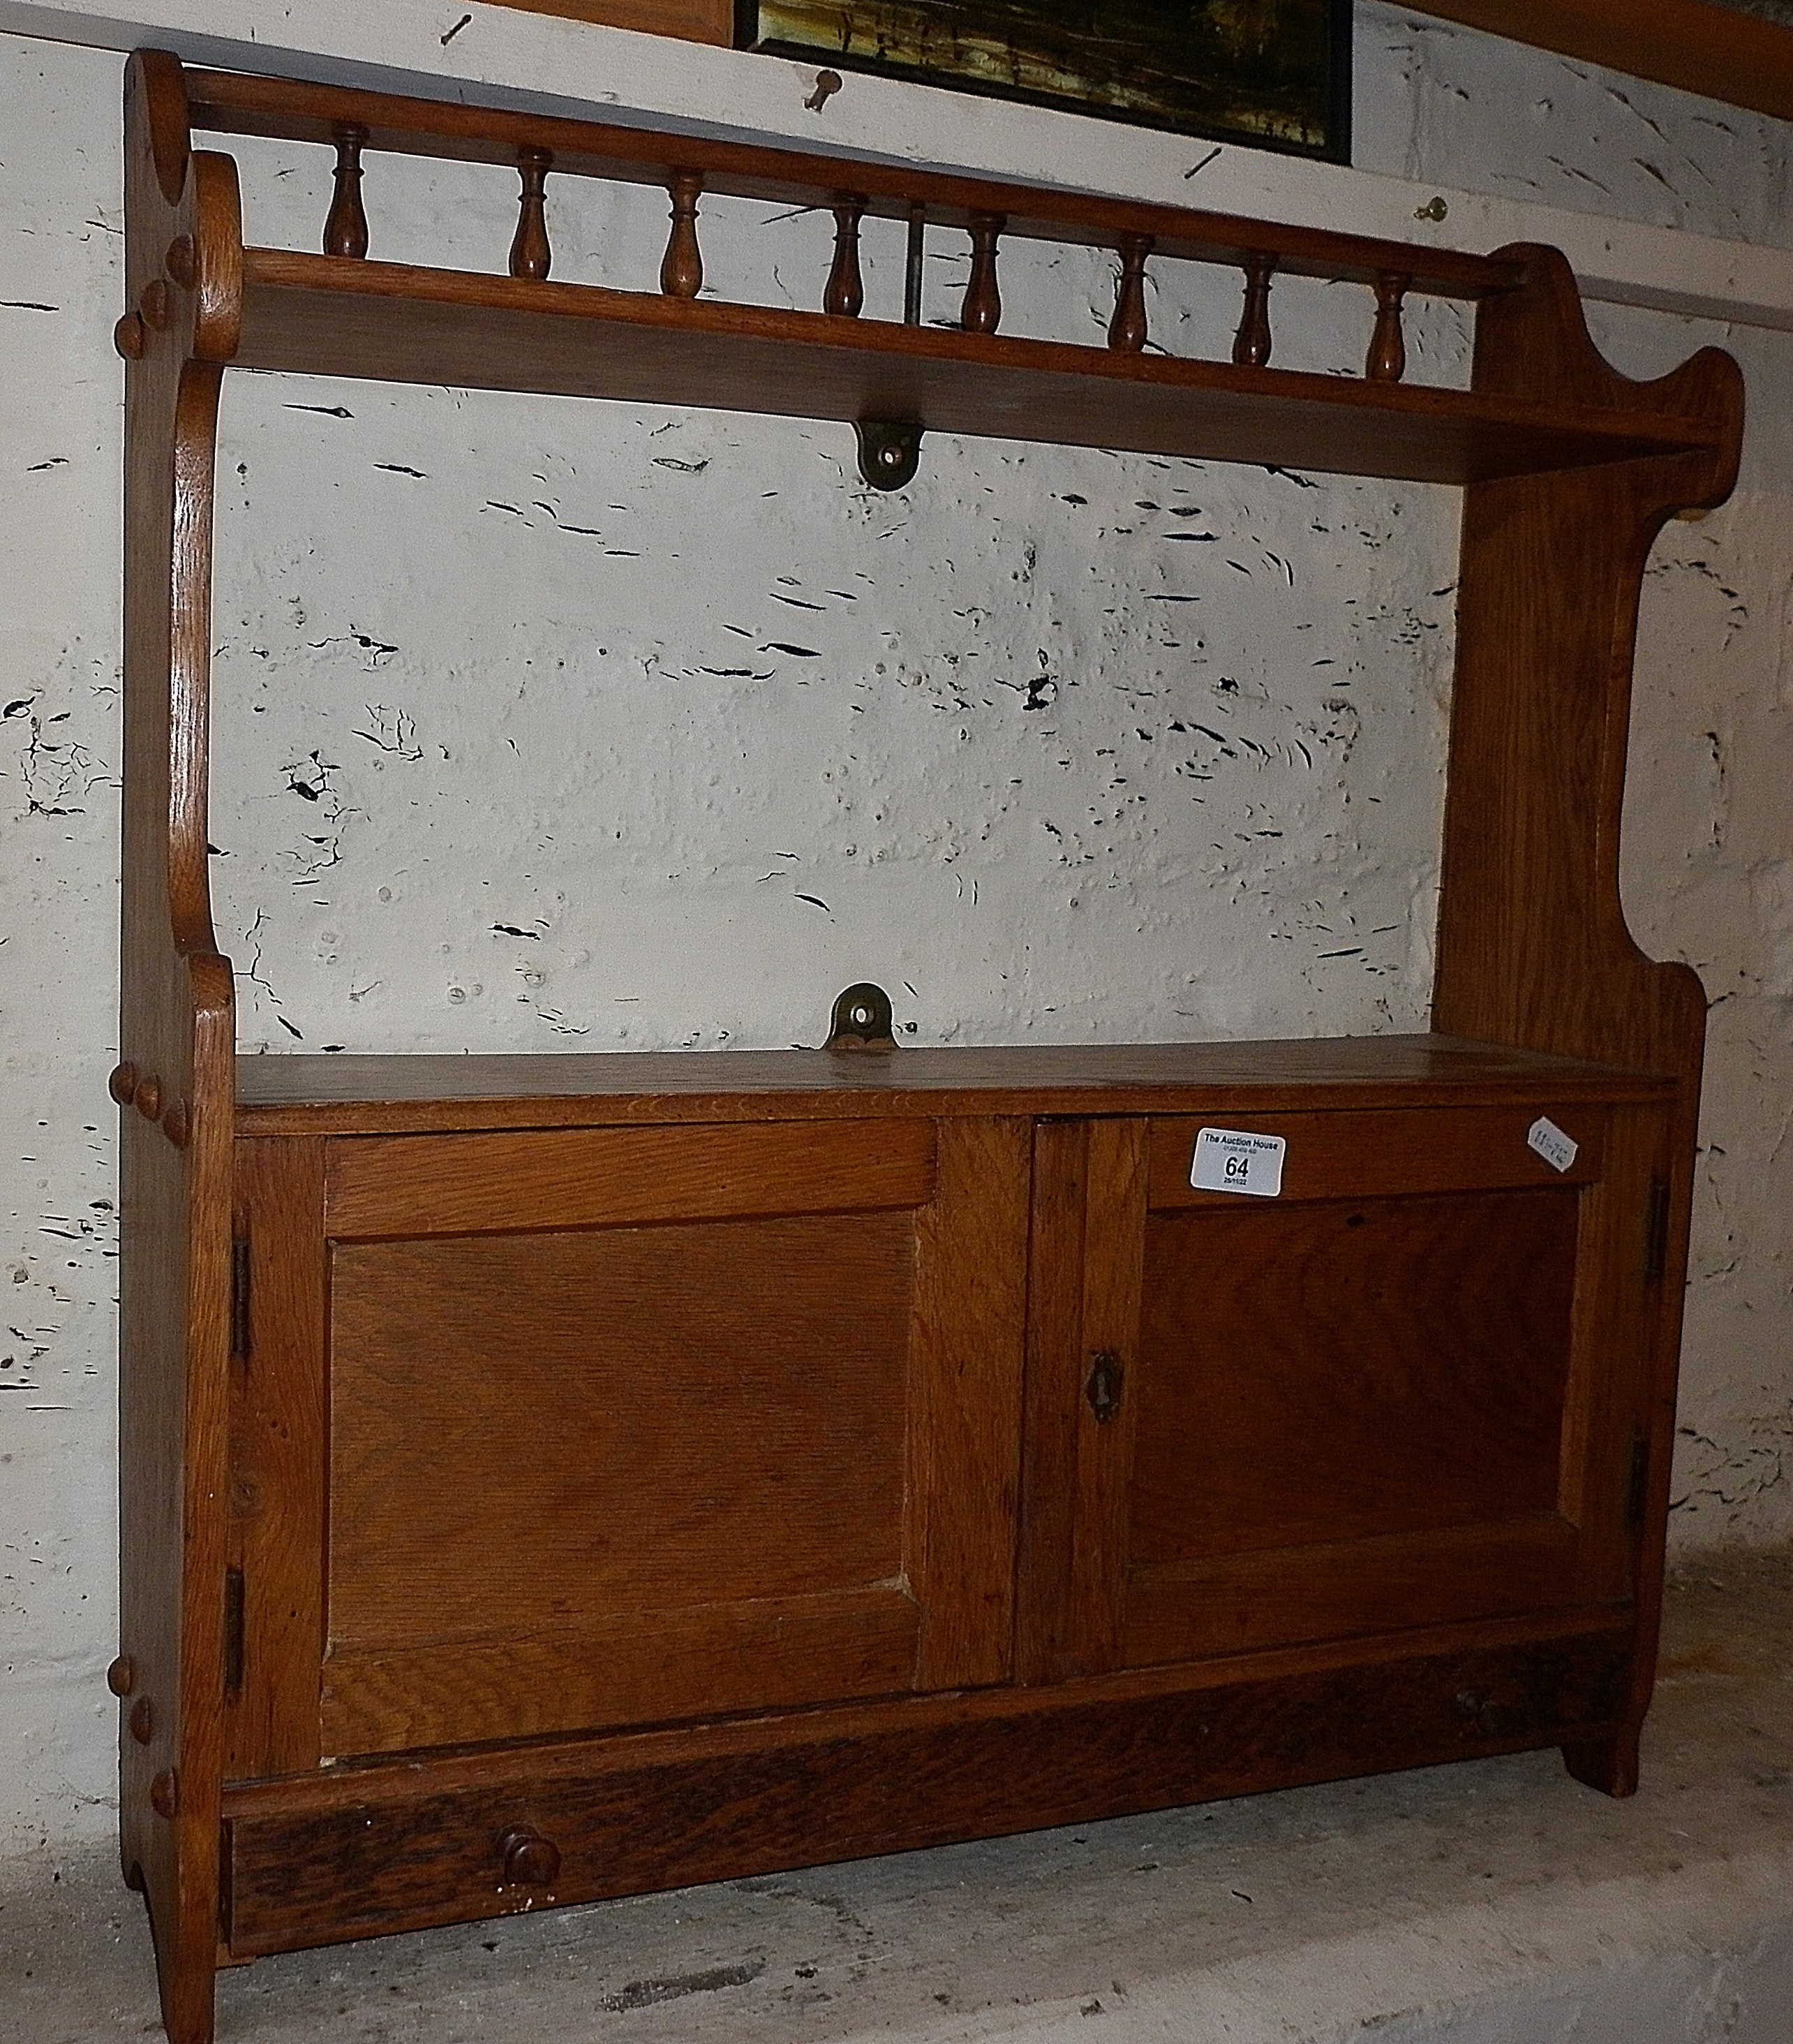 Victorian two-door wall shelf cupboard with turned gallery